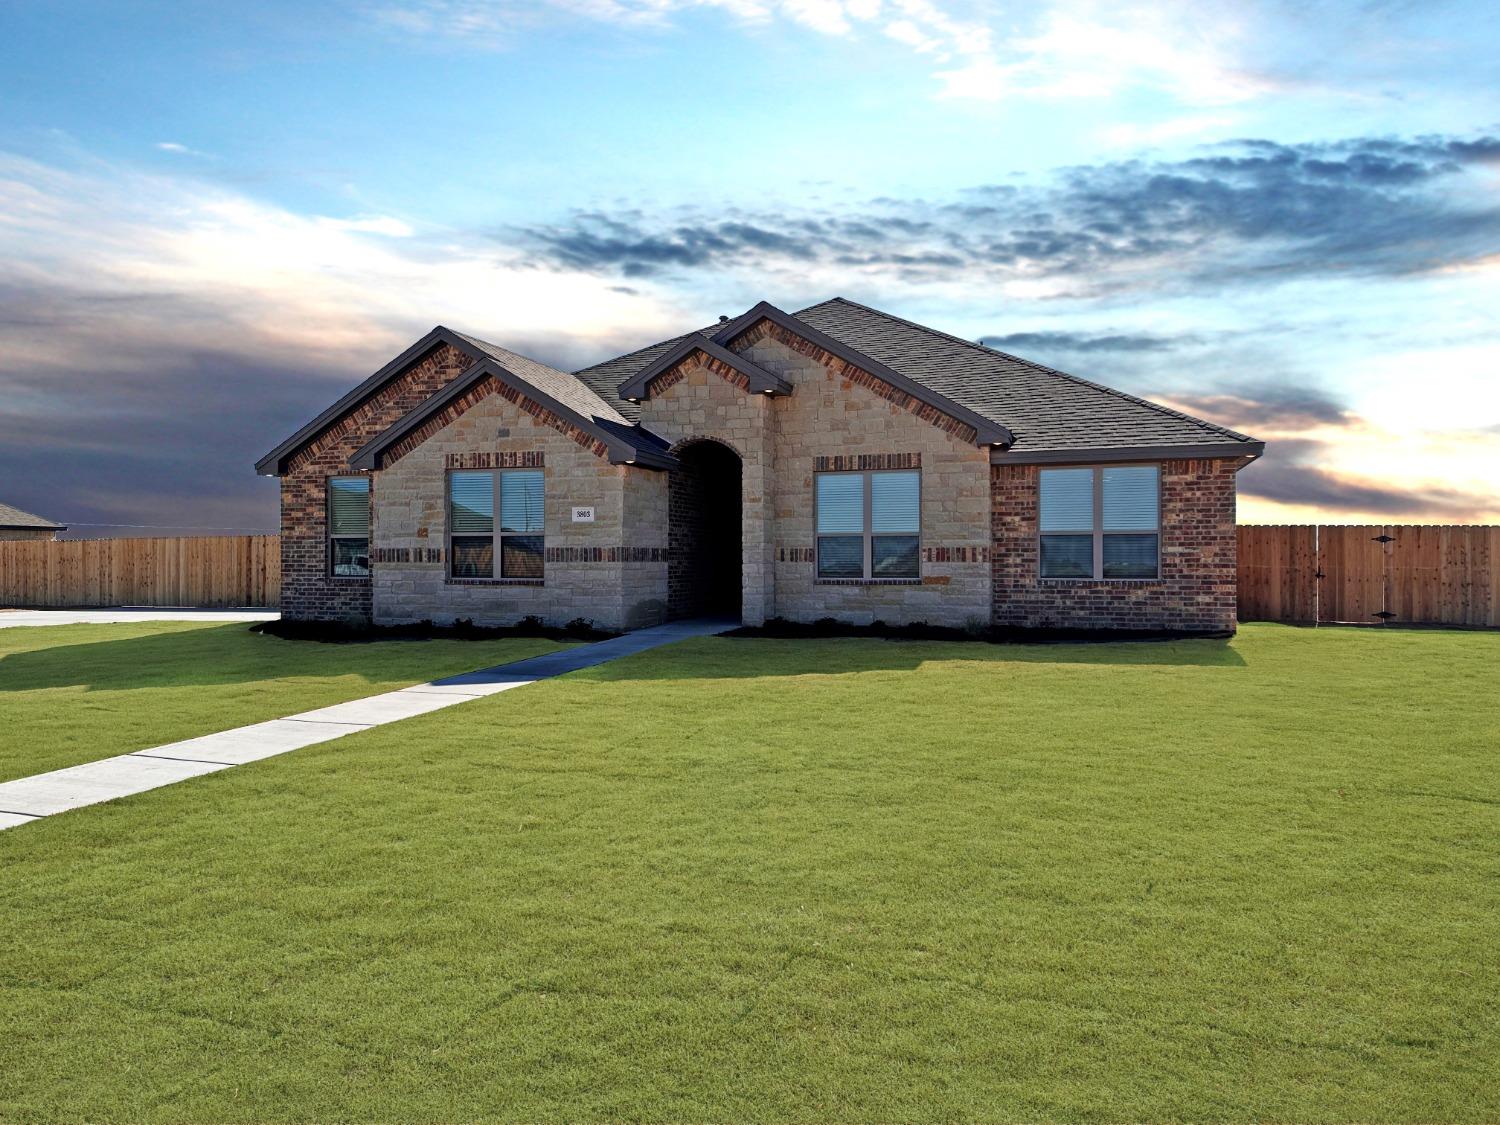 **Now Completed!**South Lubbock Beauty!  Brand new Homemakers home located in Park Hill Estates. 2,385 Sq. Ft.  4 bed, 3 full baths, 2 car garage on a sprawling one-acre lot. Aubrey Floorplan.  Sod & Sprinkler in front yard included. All on one level.